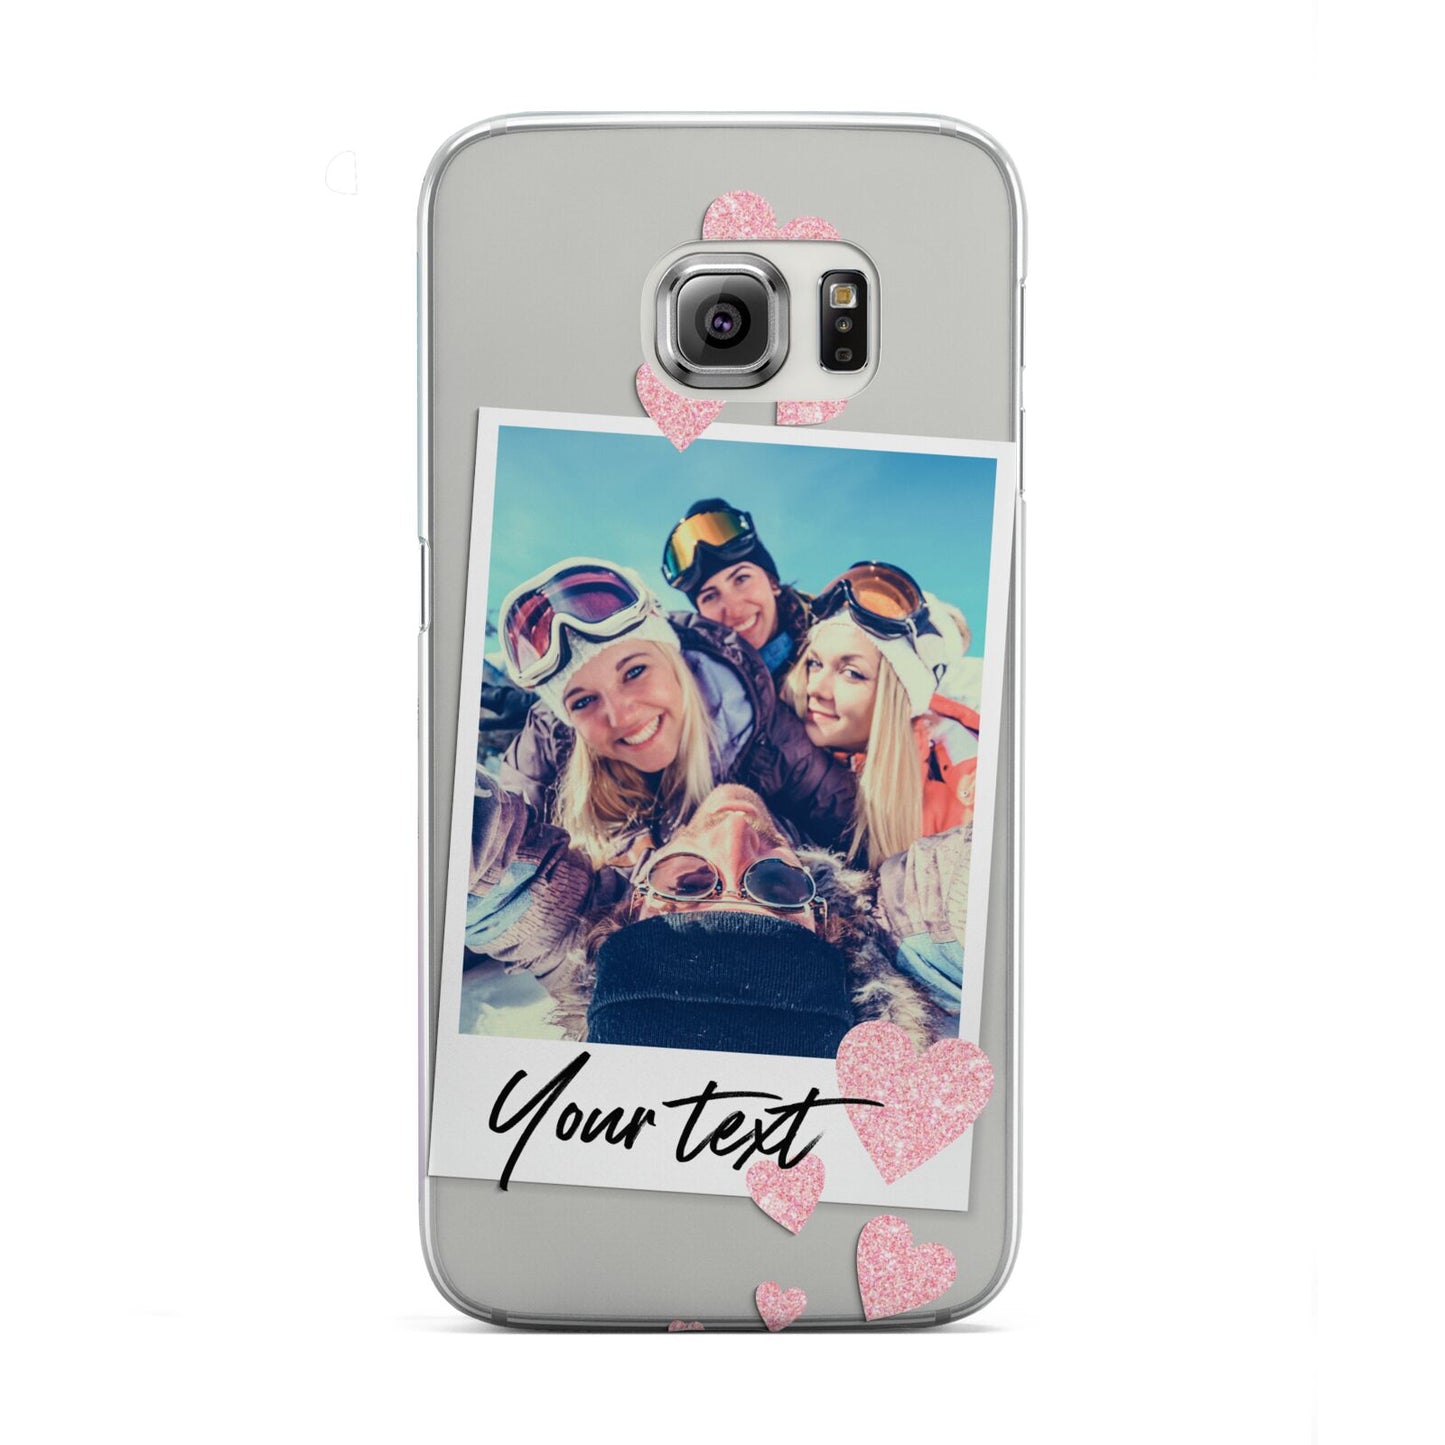 Photo with Text Samsung Galaxy S6 Edge Case